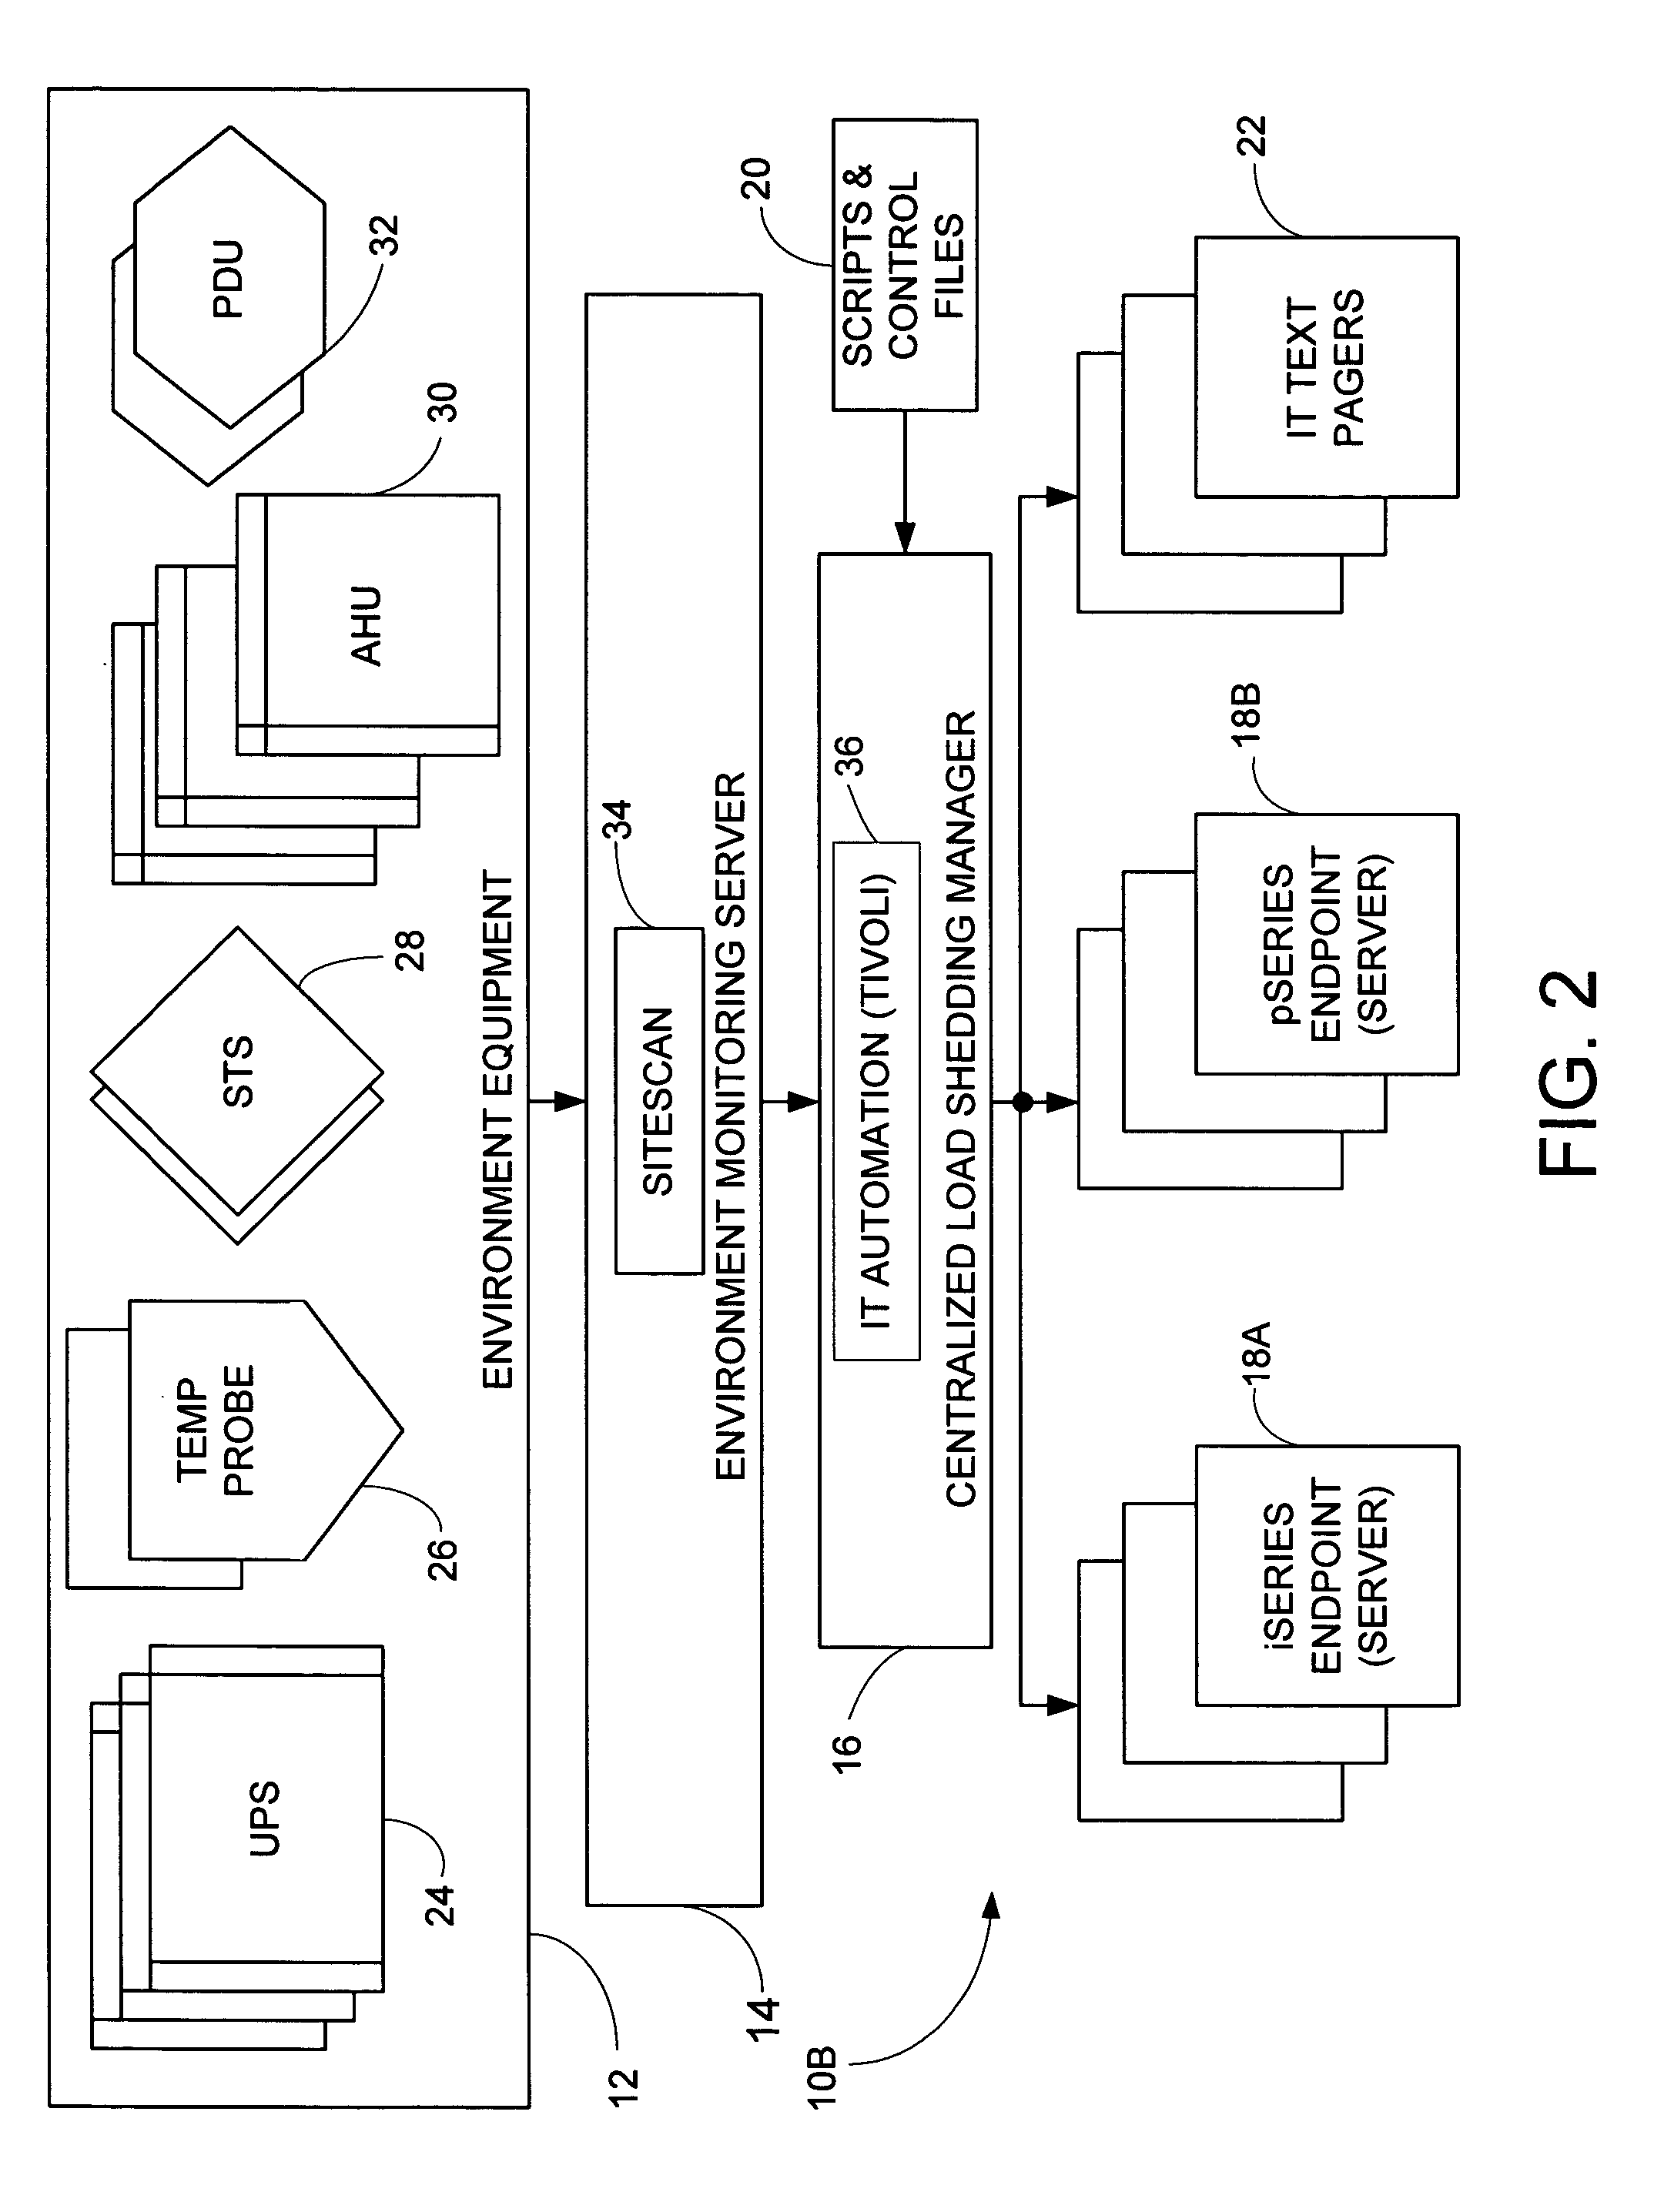 Method, apparatus and program product for managing the operation of a computing complex during a utility interruption